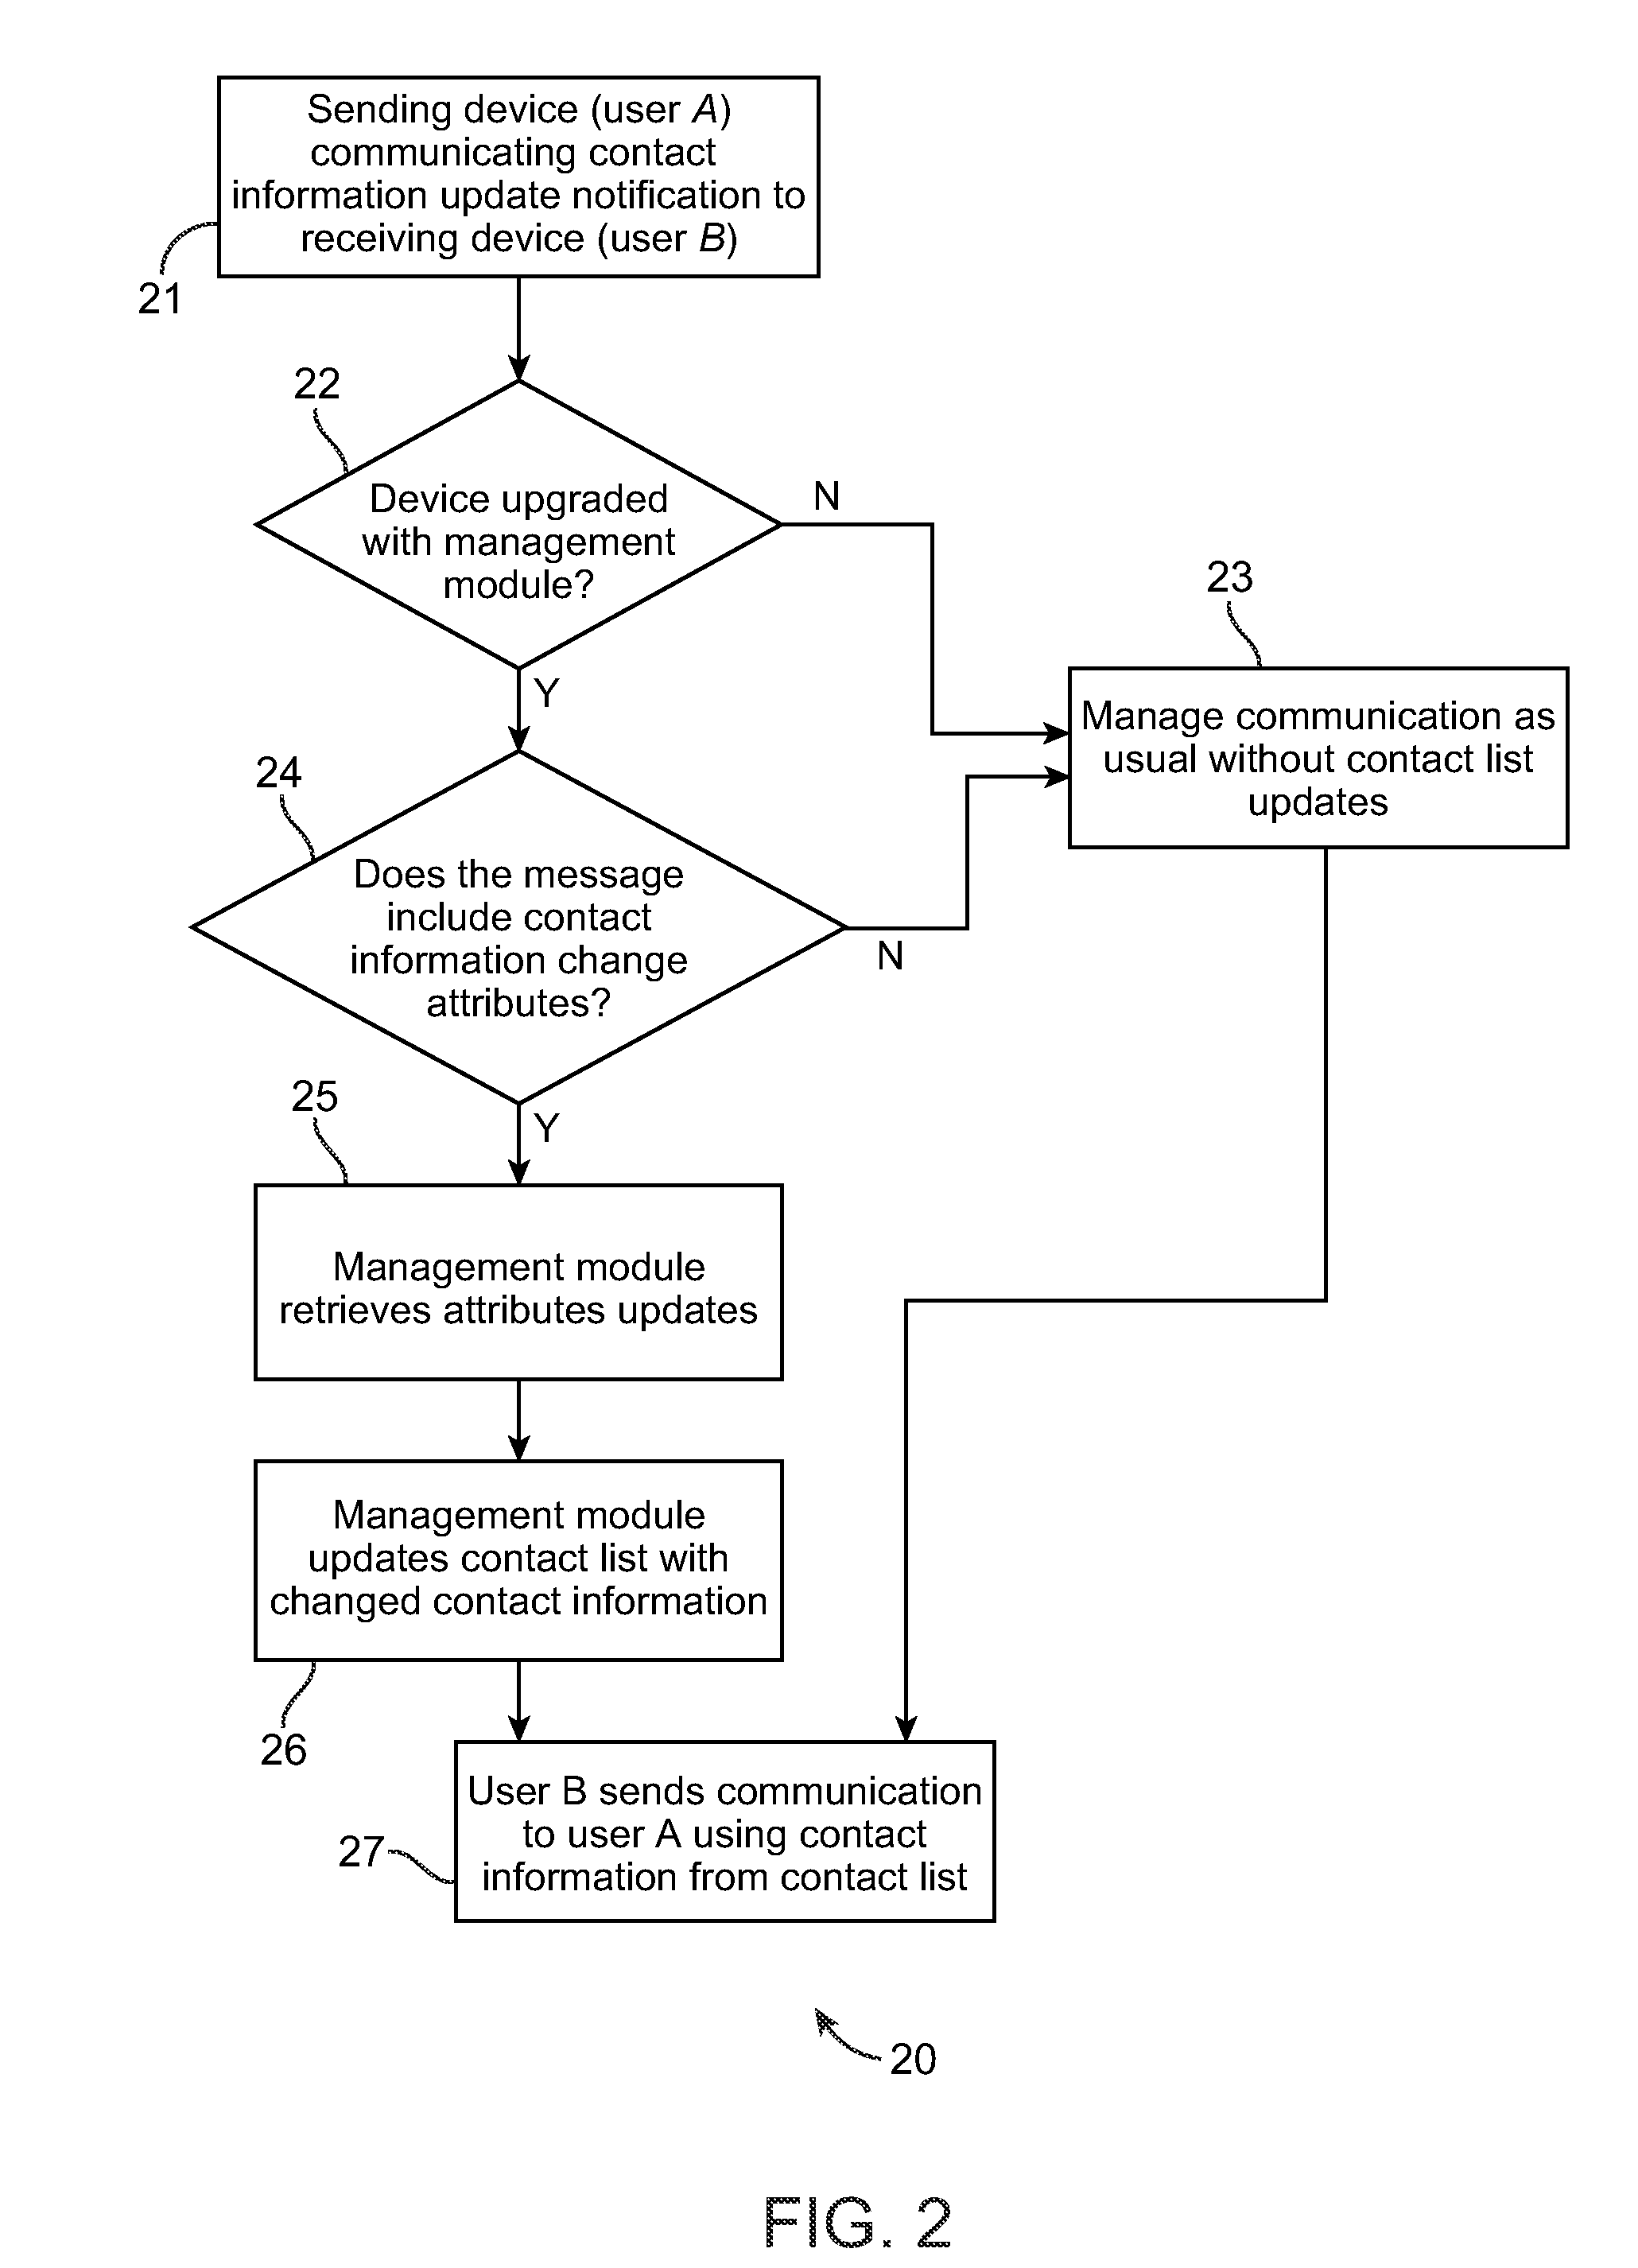 Method and system for dynamic contact information management in electronic communication devices